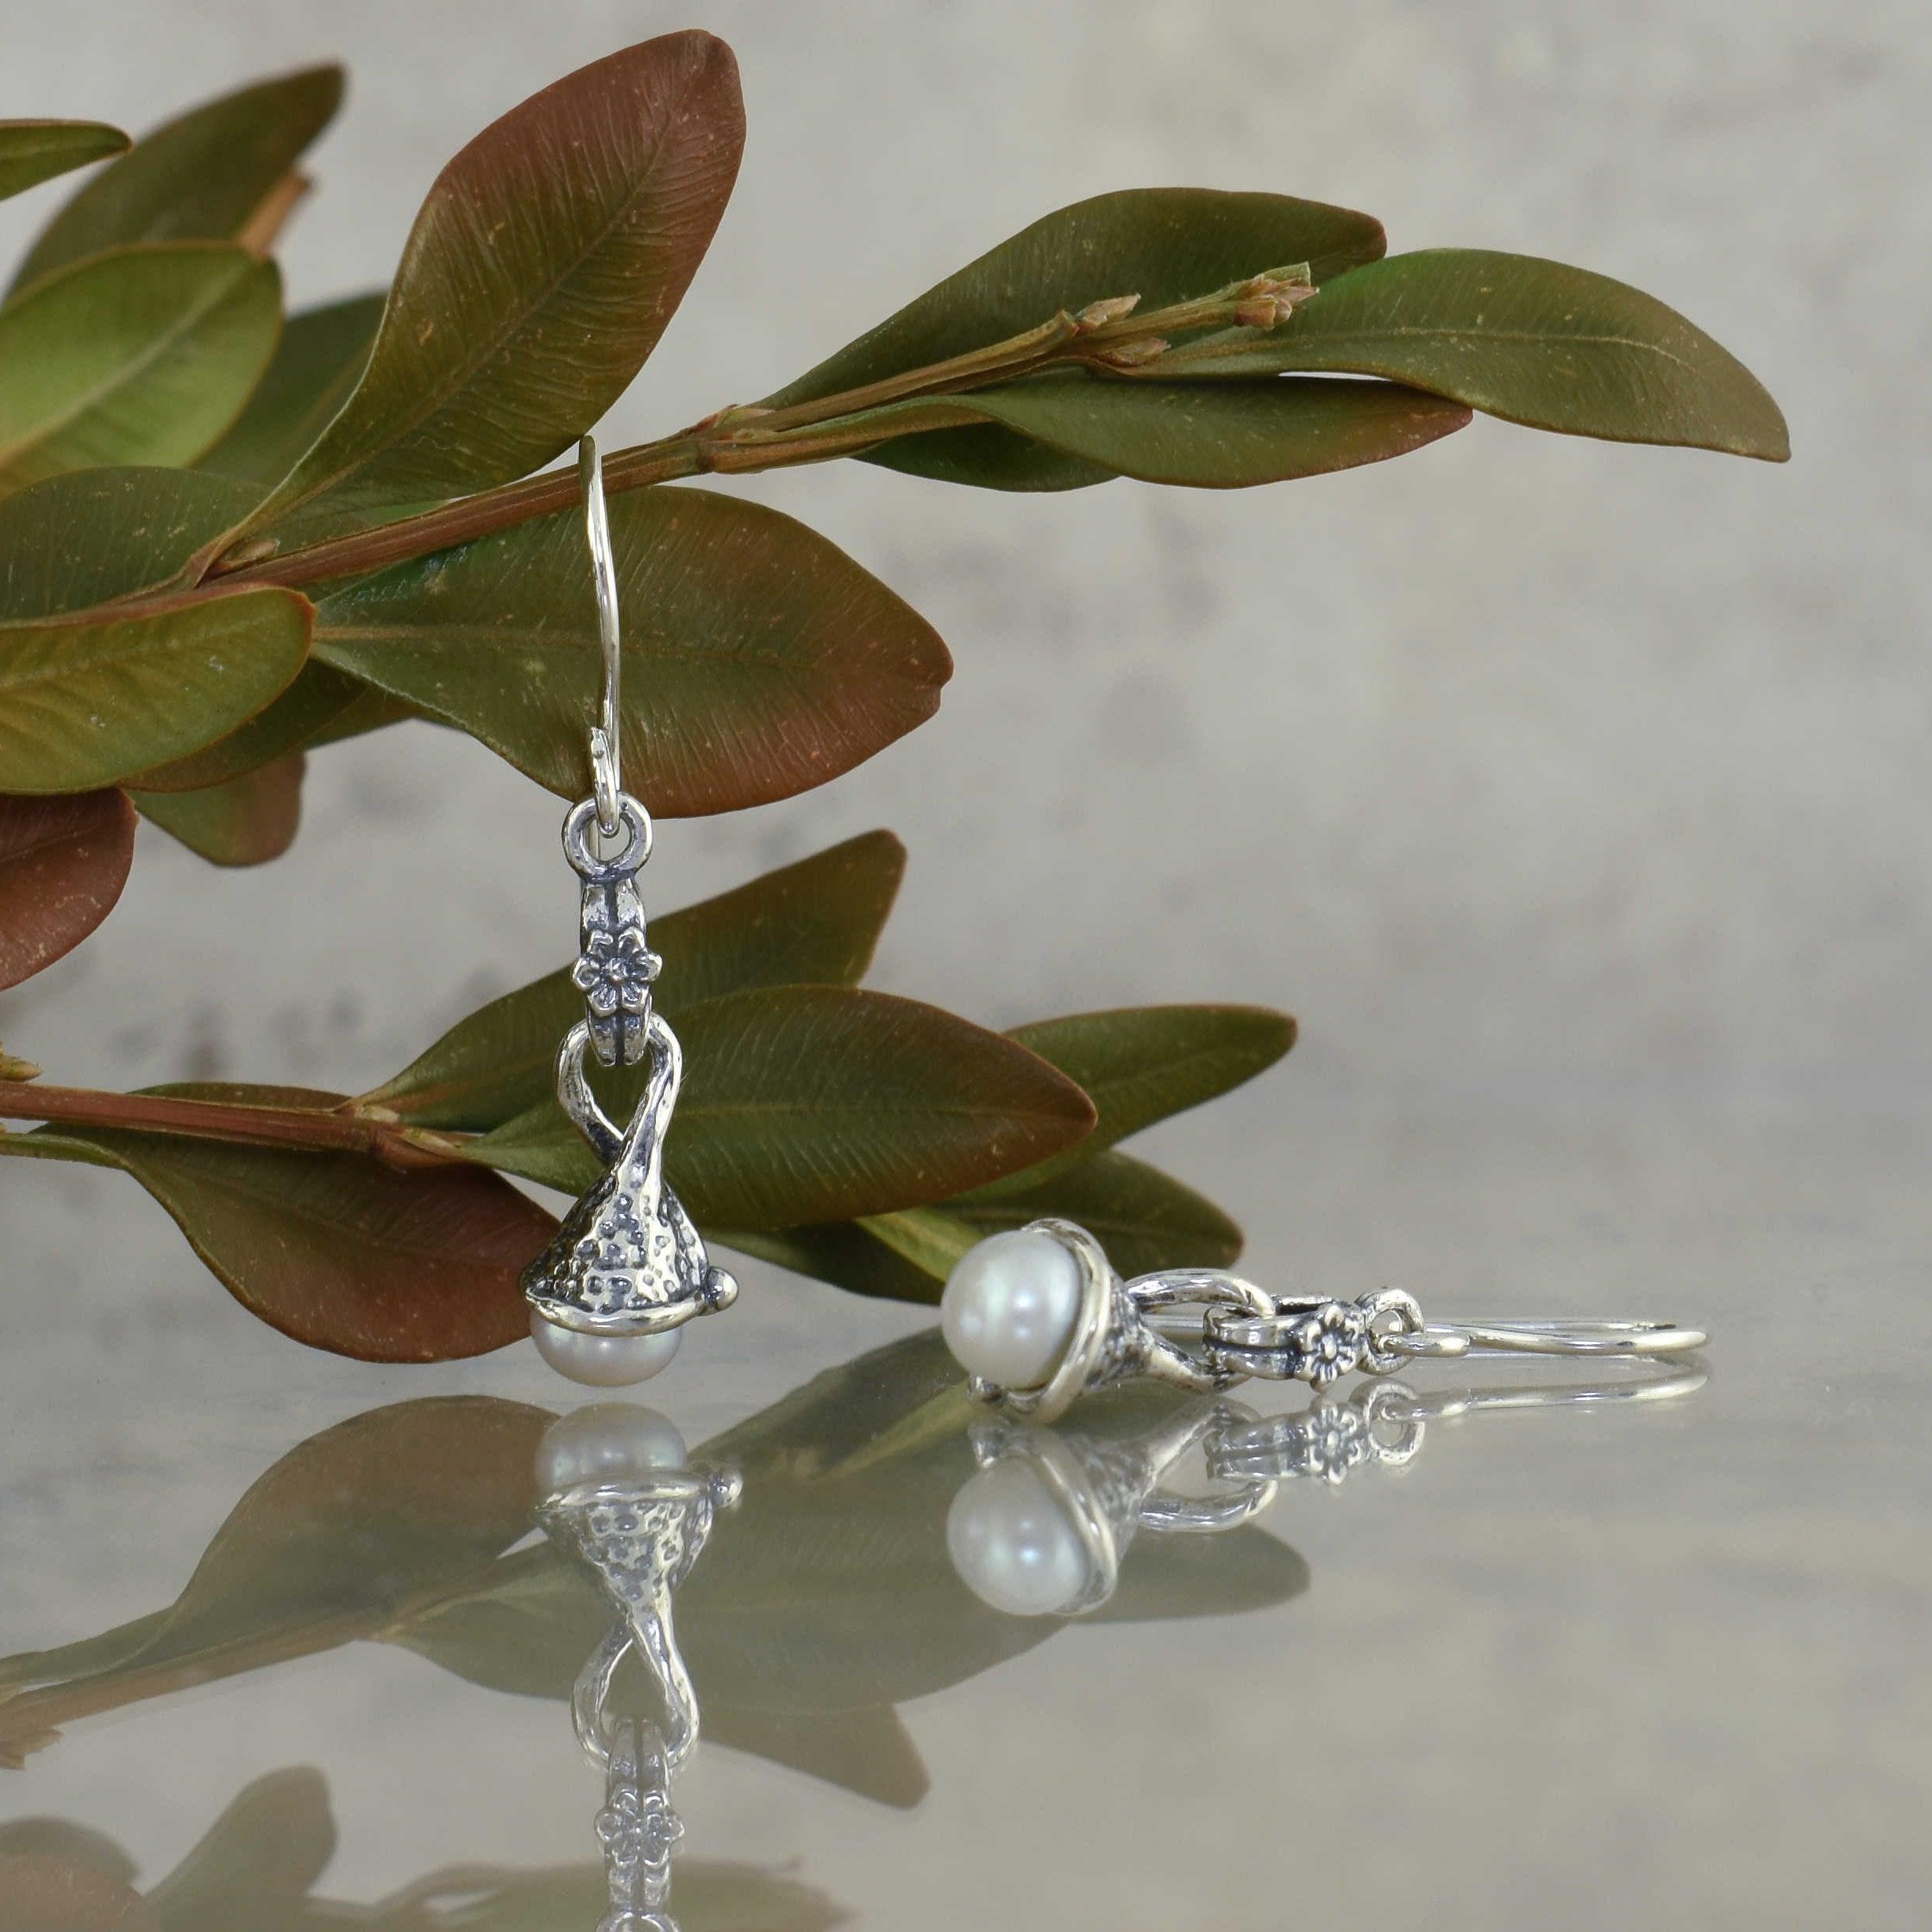 Handcrafted .925 sterling silver earrings with freshwater pearl